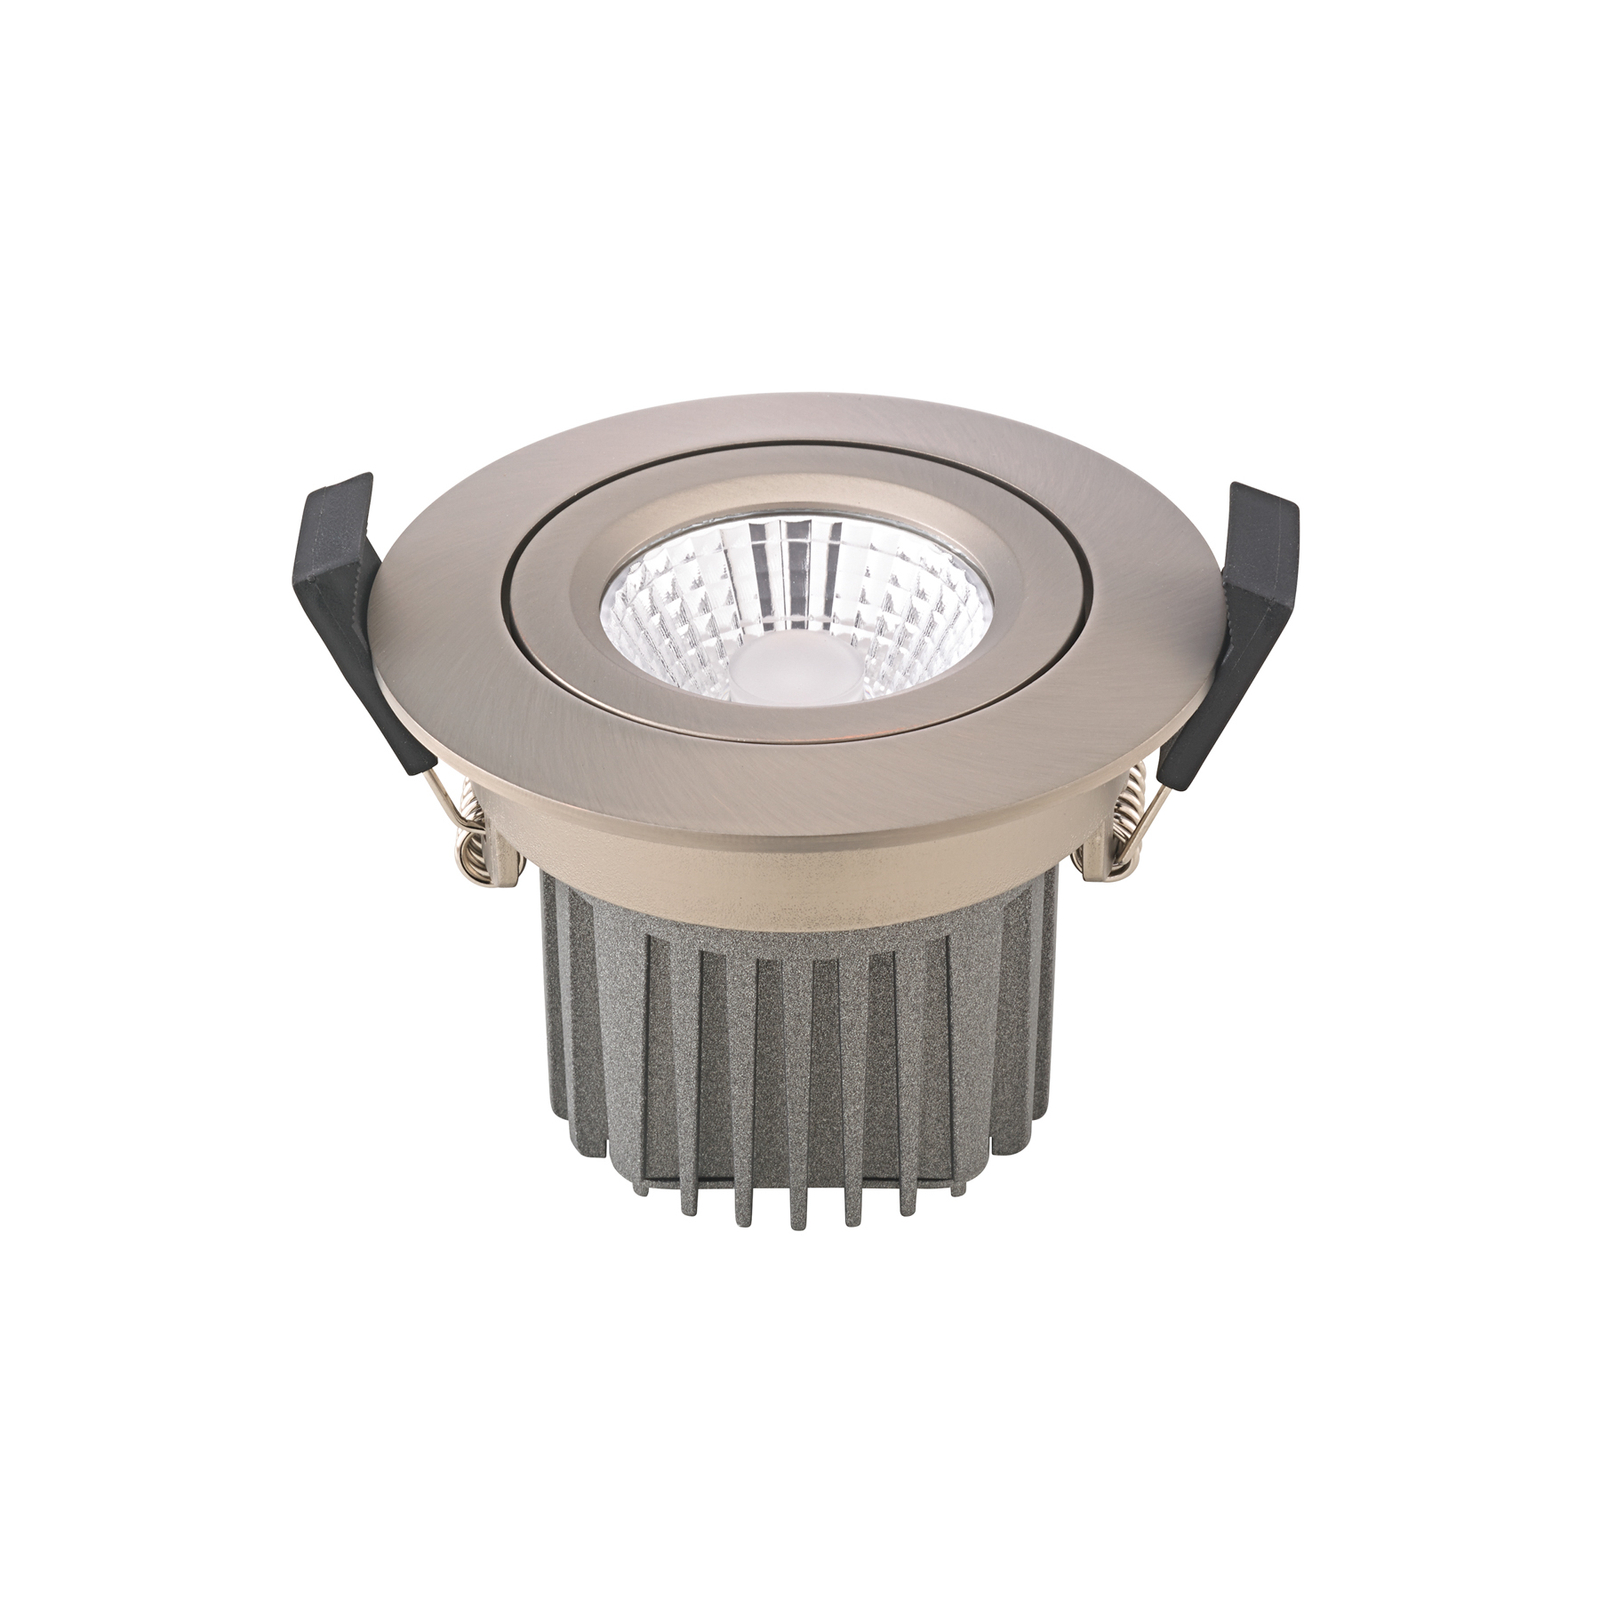 Diled LED recessed ceiling spotlight, Ø8.5cm, 10 W, dimmable, steel